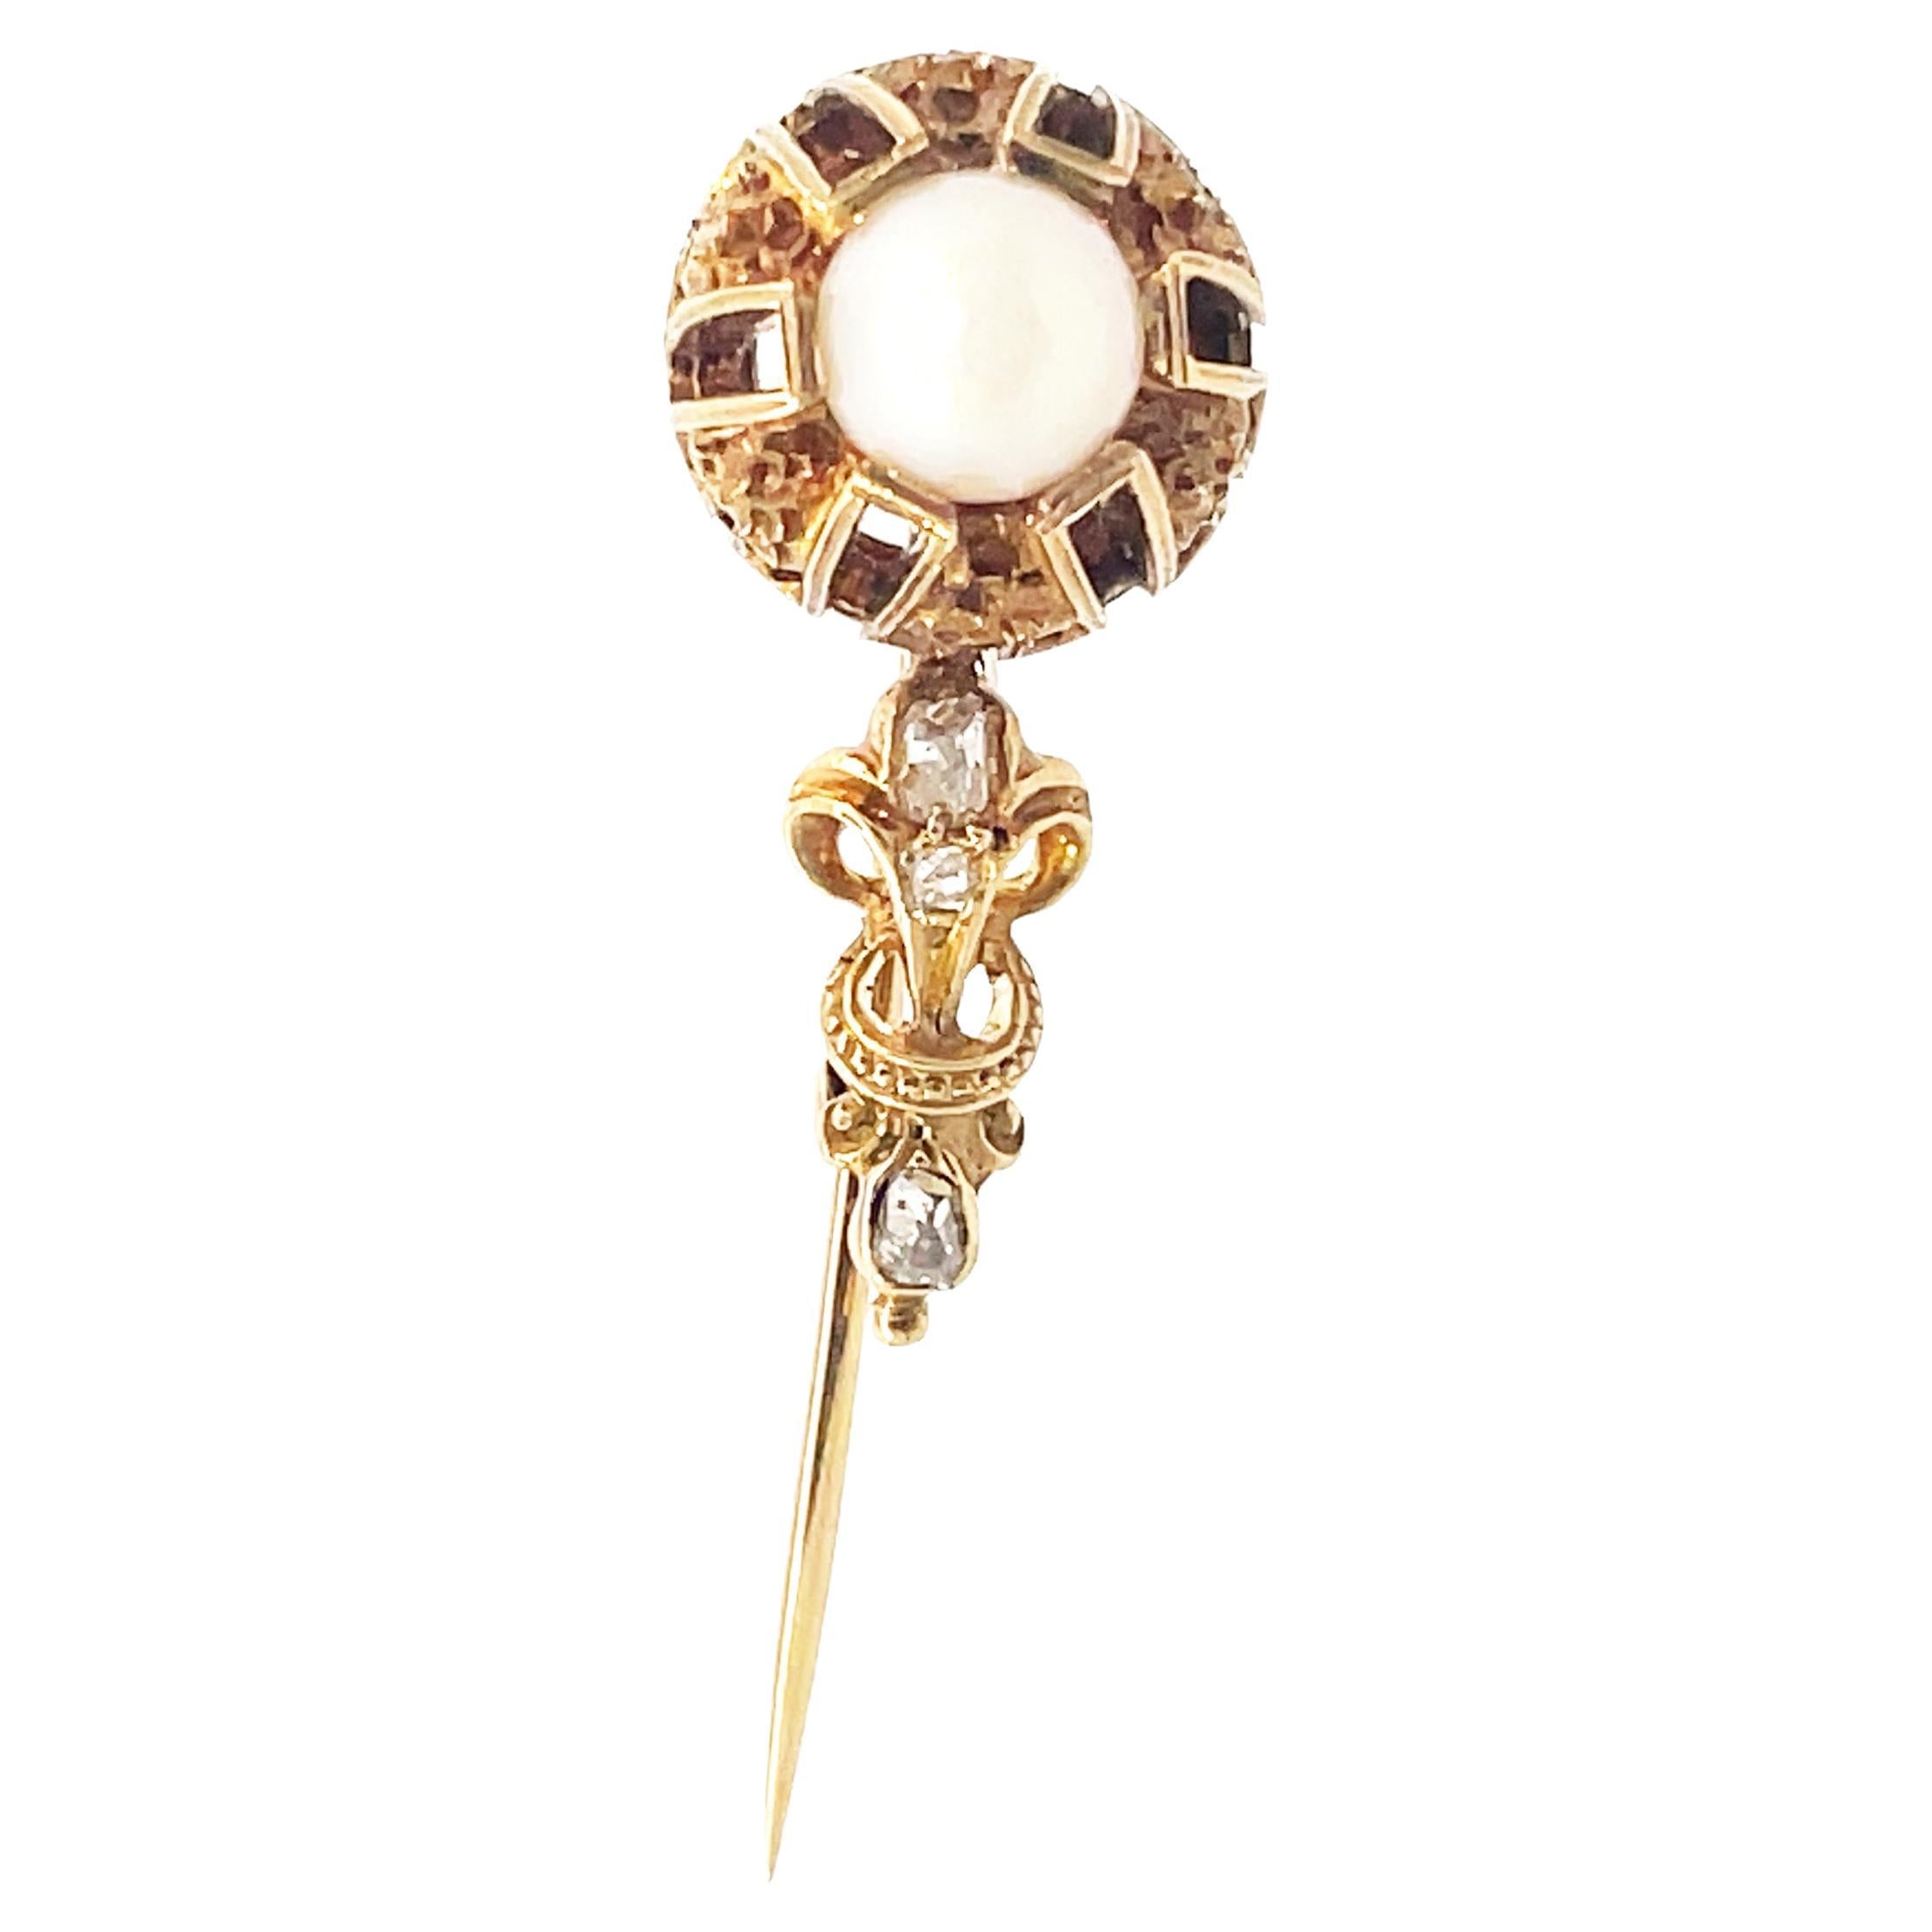 1860 Victorian Old Mine Cut Diamond and Natural Pearl Pin with GIA Report